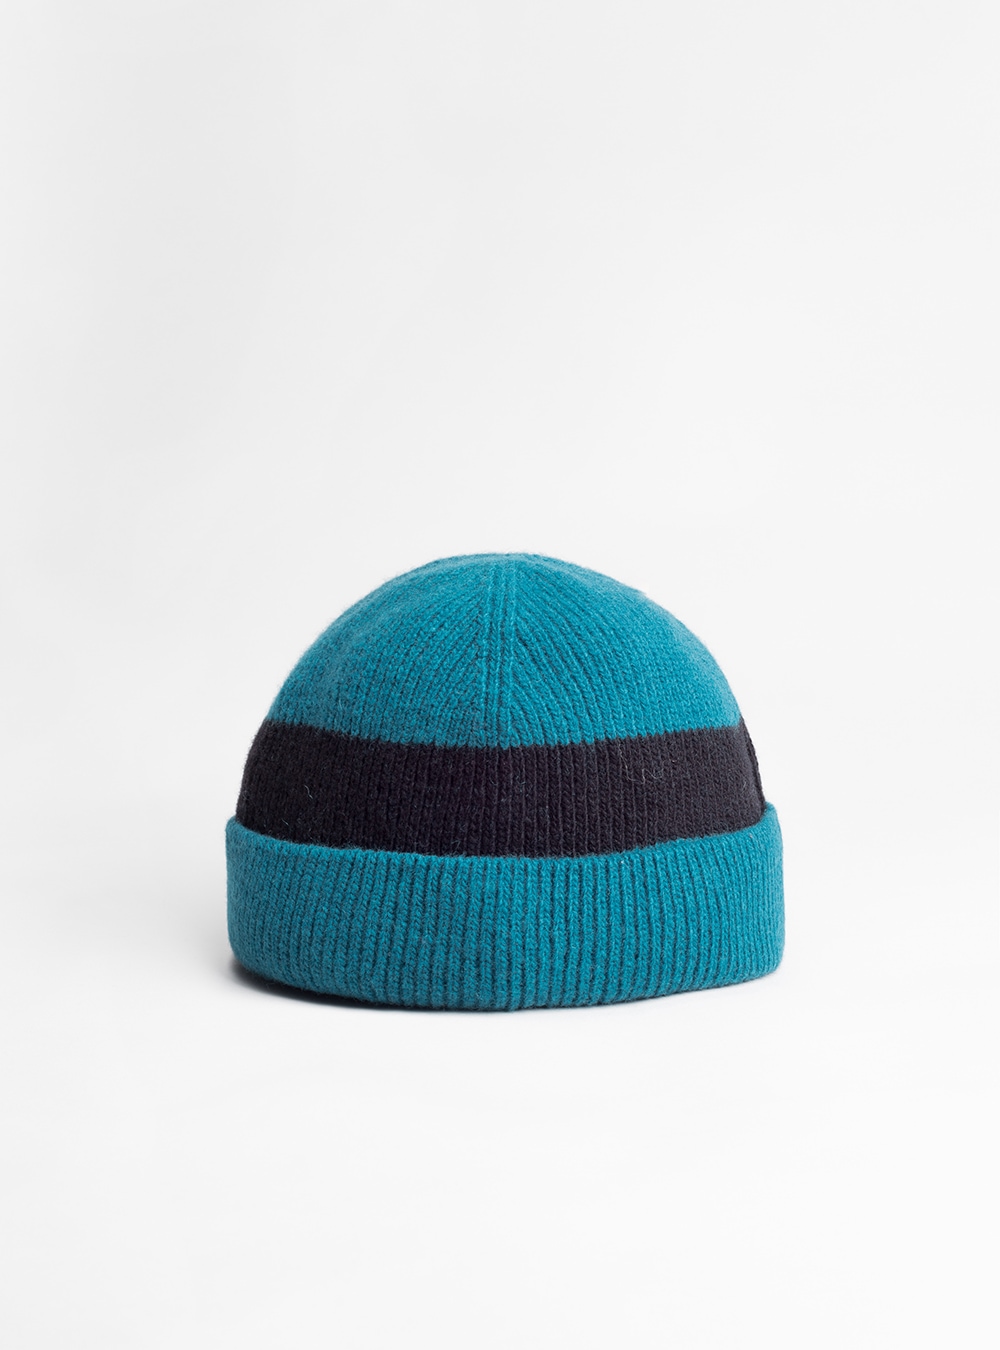 Knitted stripes beanie hat (sea blue) in wool, made in Portugal by wetheknot